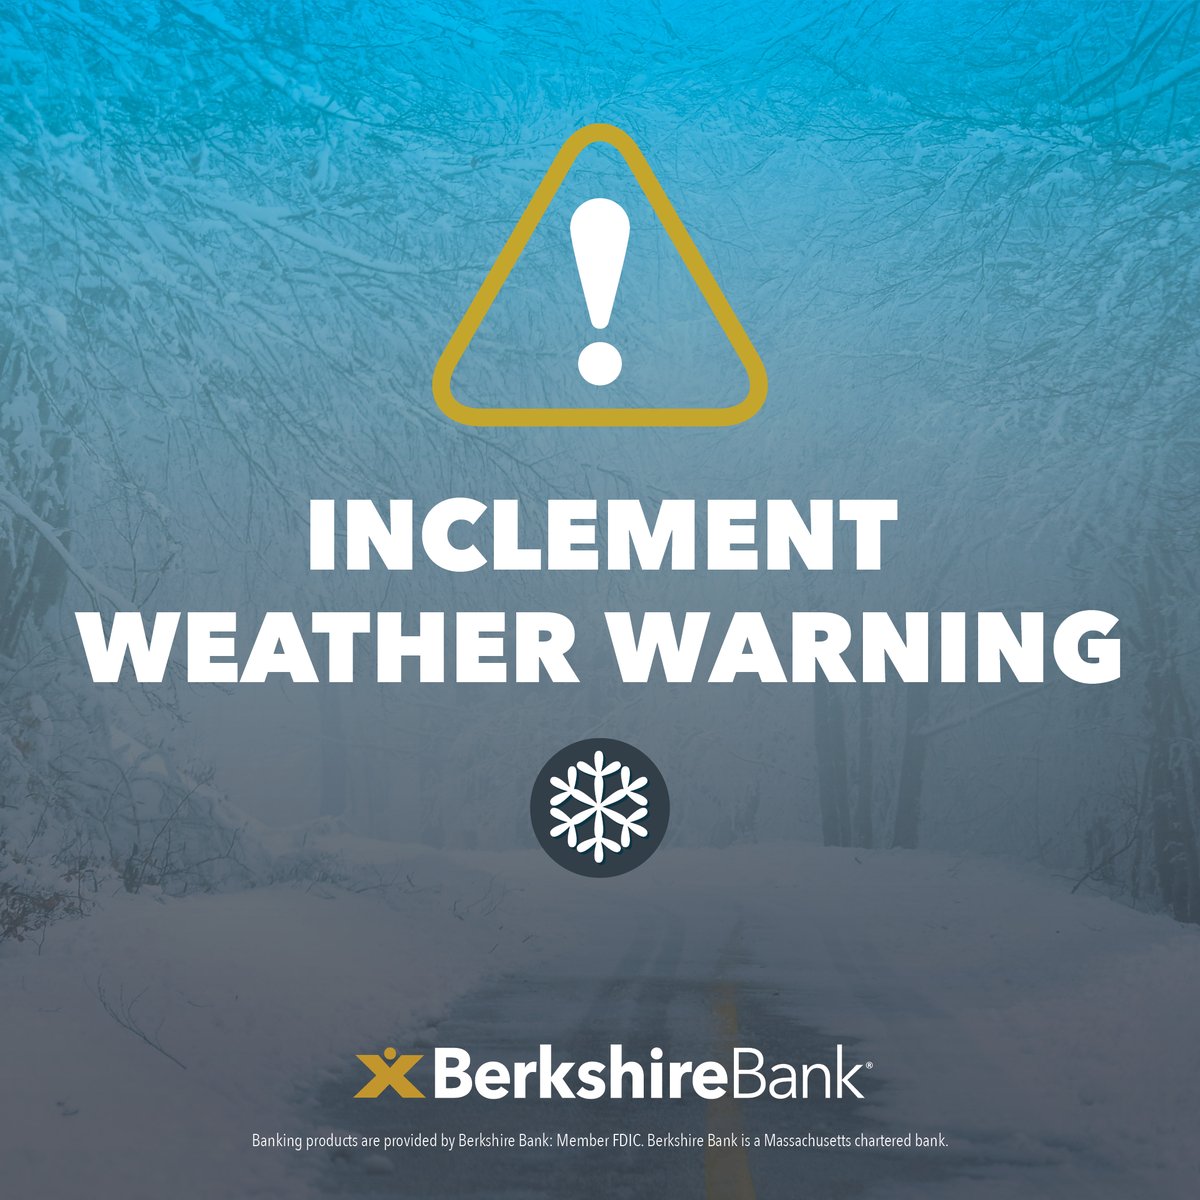 Today’s inclement weather is impacting service hours at some of our locations. For details, and to plan ahead, please visit BerkshireBank.com throughout the day for updates.